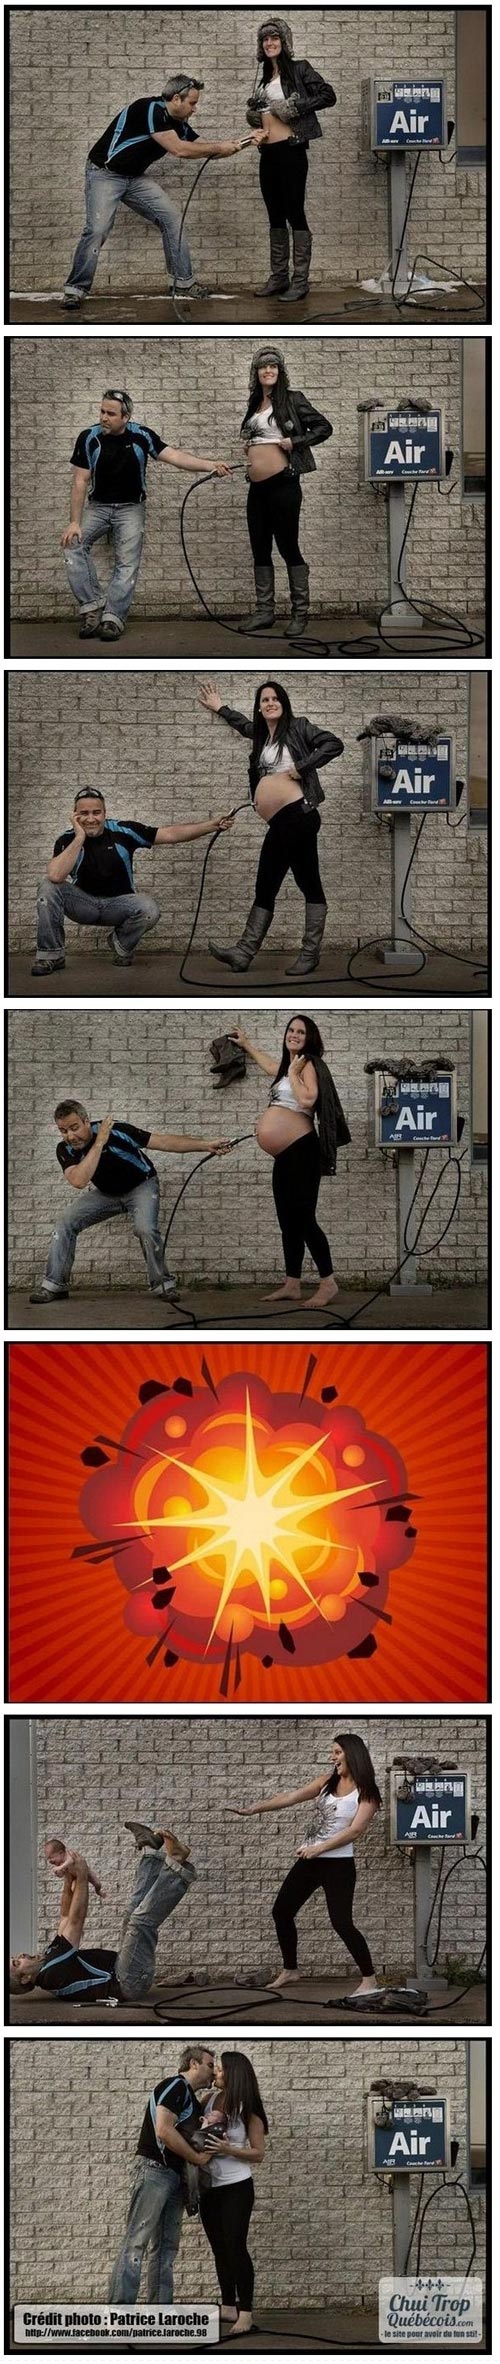 How babies are made (with an air pump)